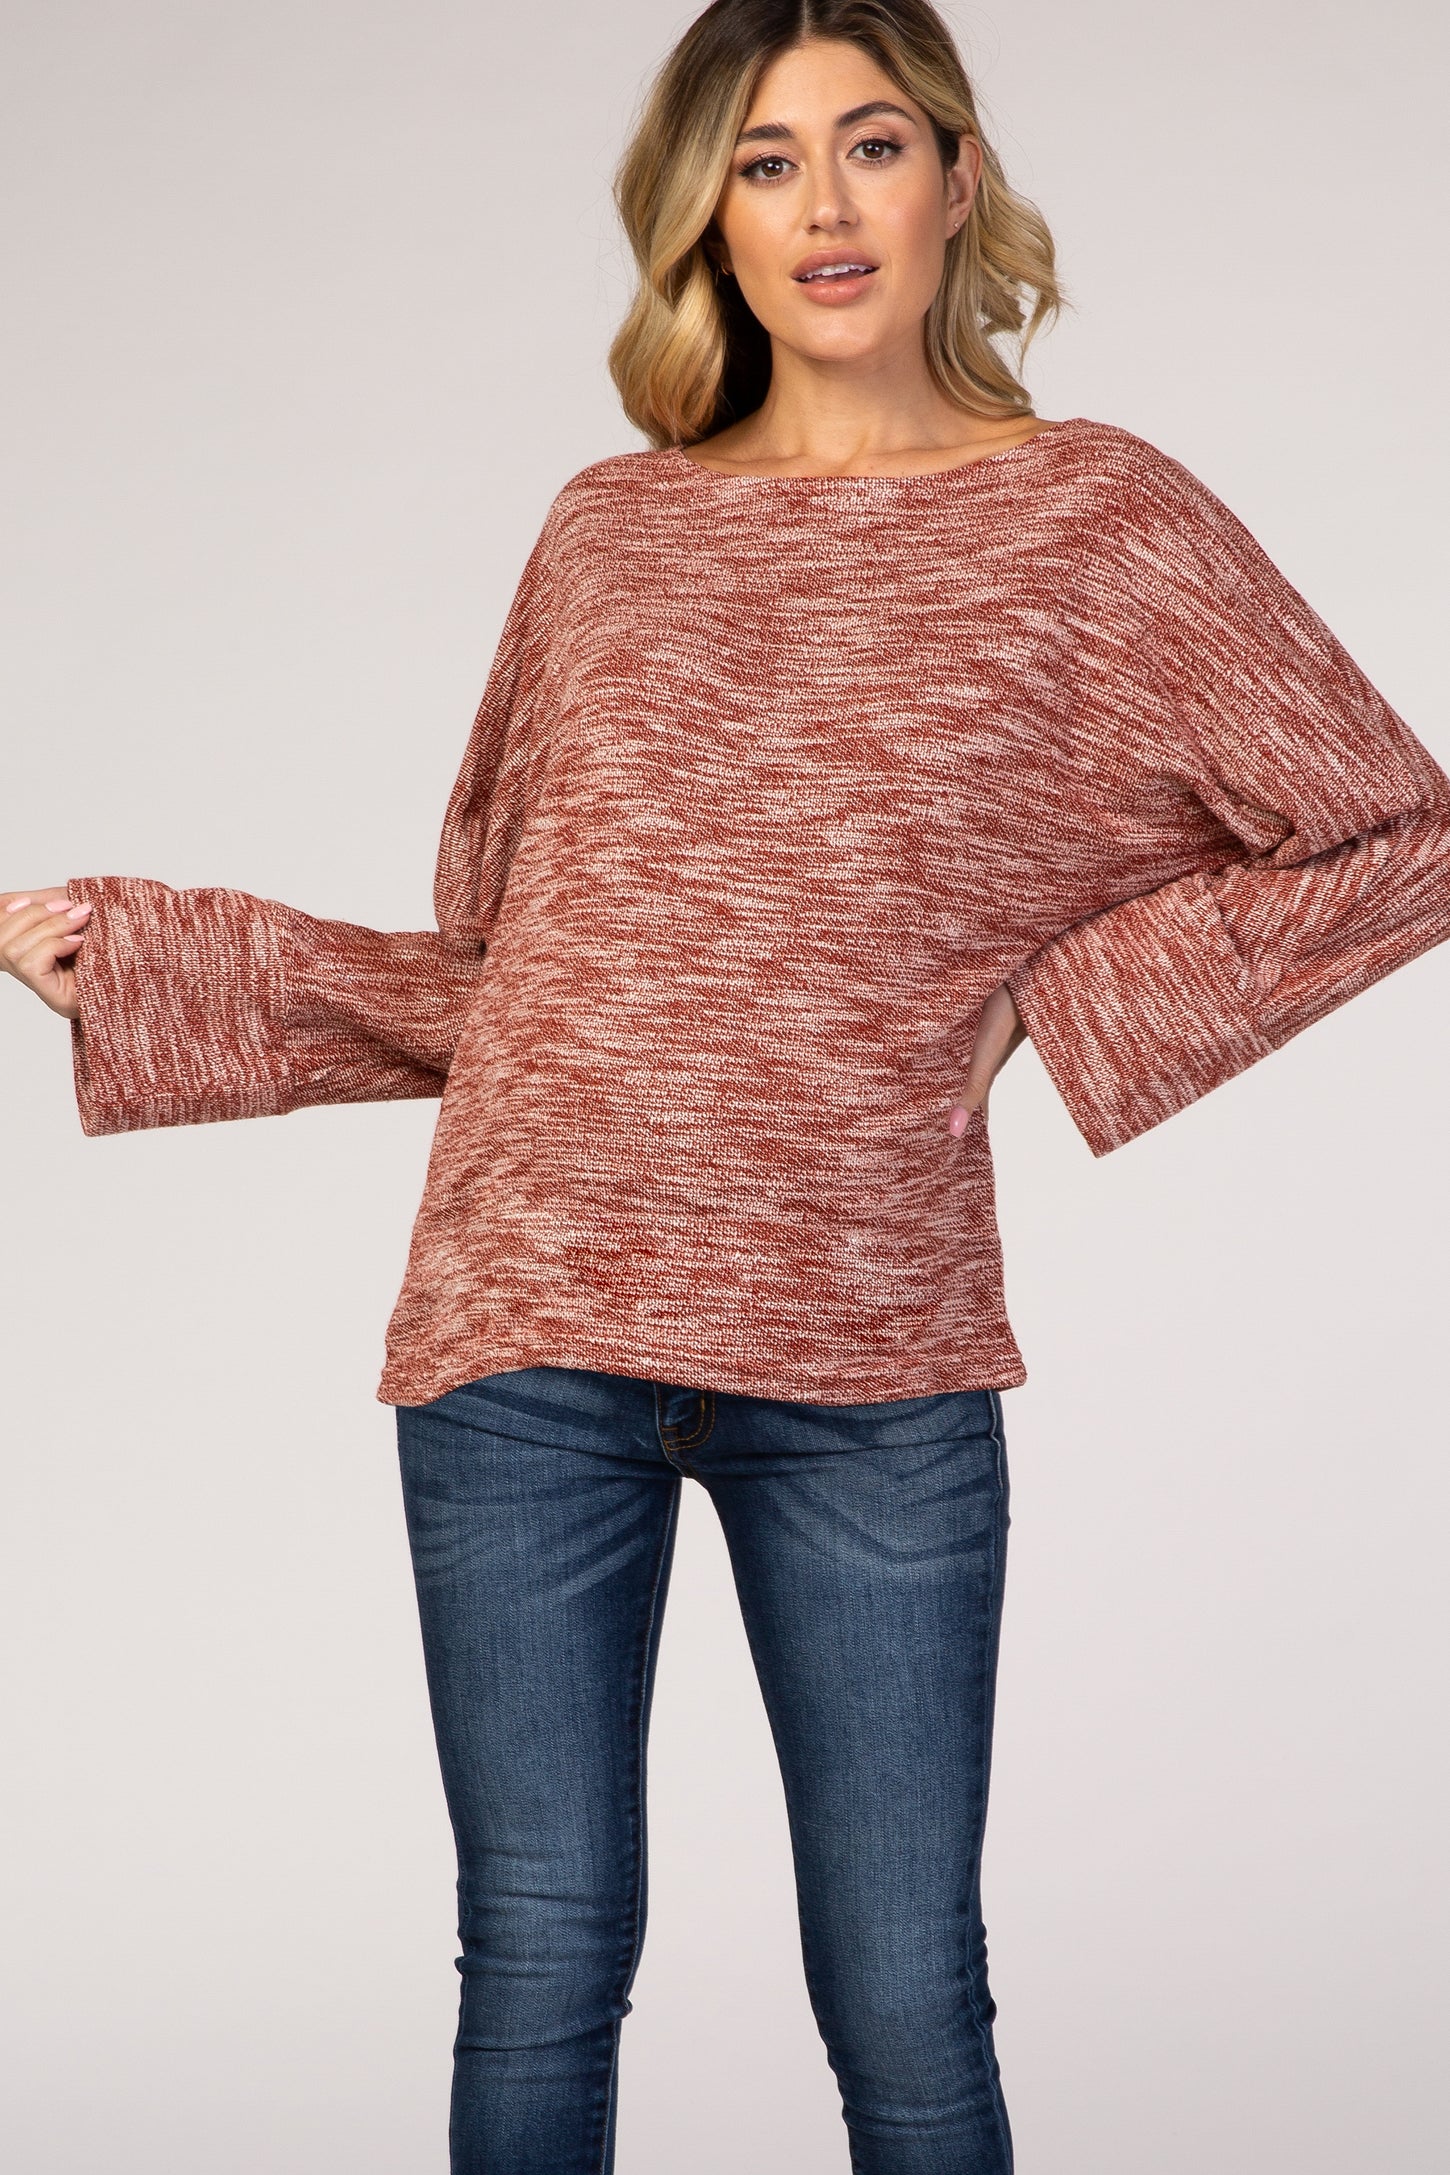 Rust Marled Knit Back Button Maternity Top